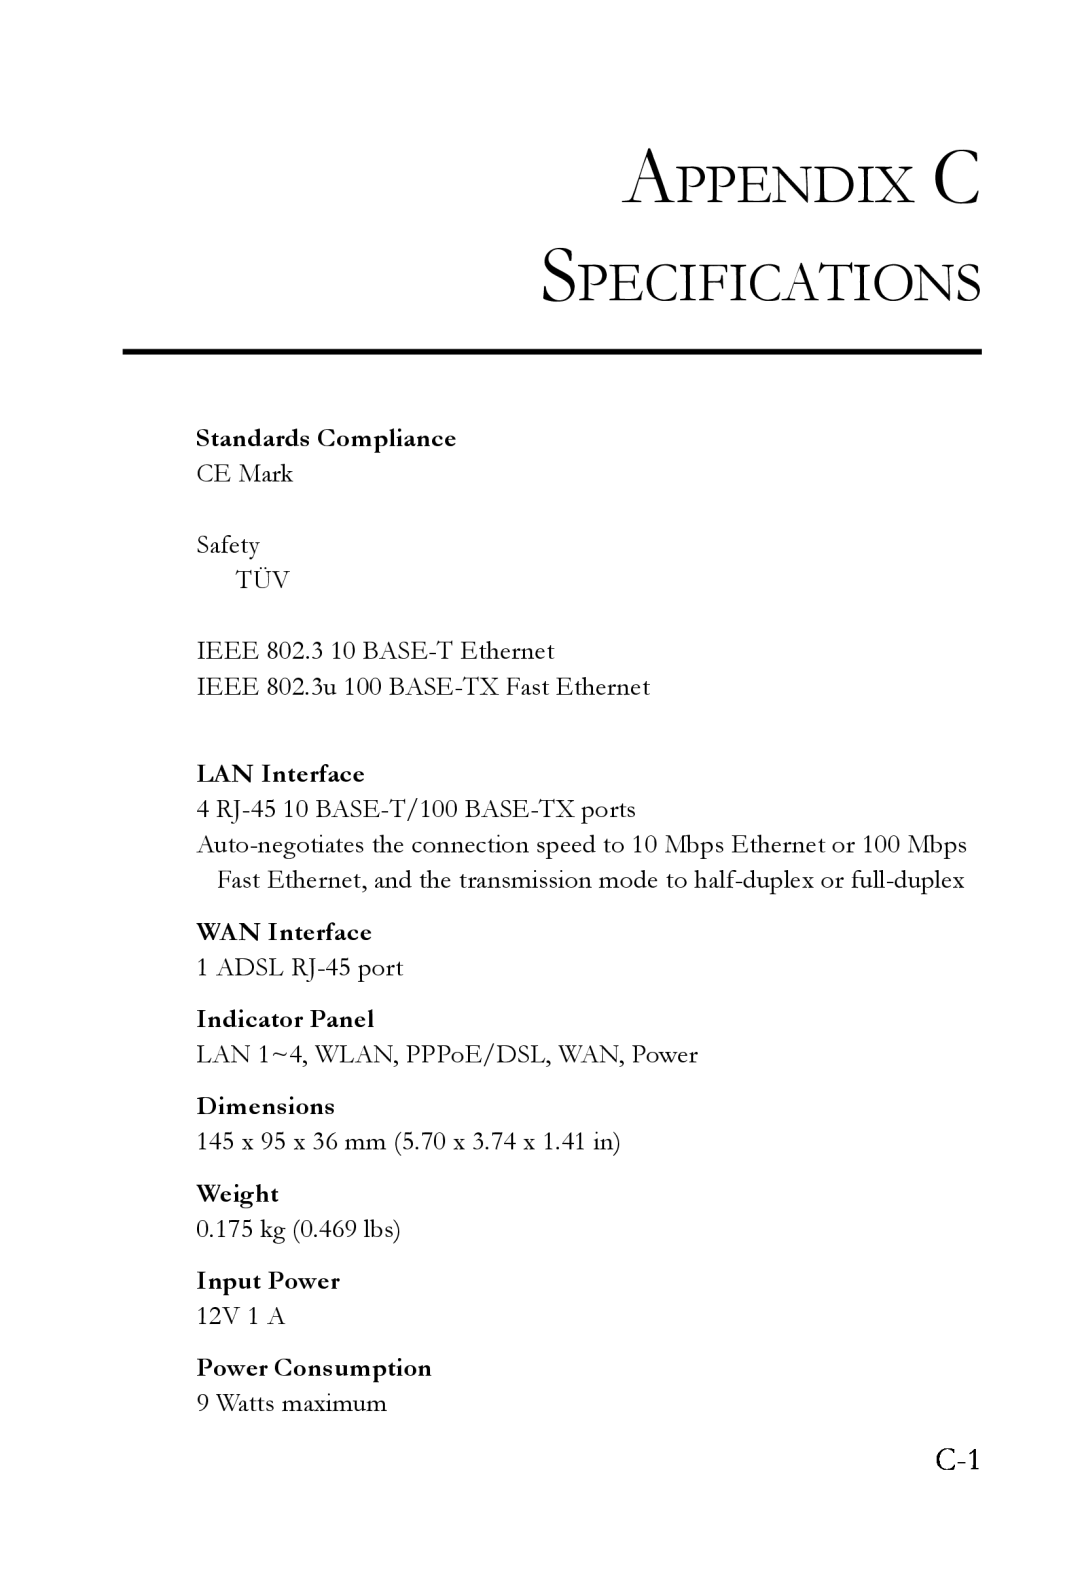 SMC Networks SMCWBR14T-G Appendix C Specifications, Standards Compliance, LAN Interface, WAN Interface, Indicator Panel 